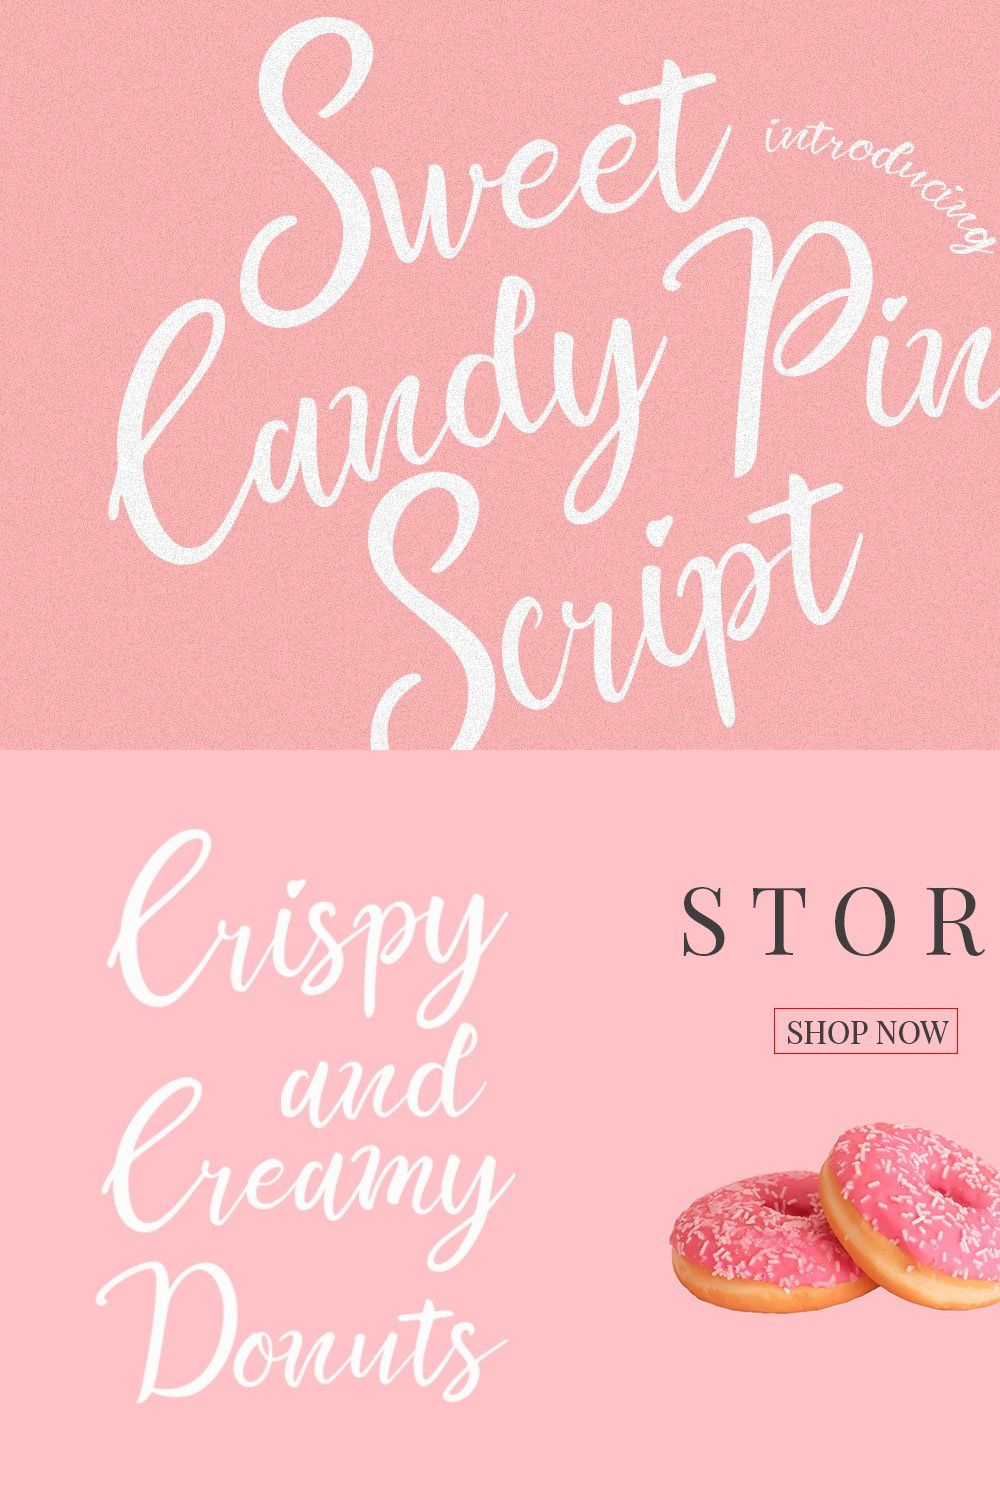 Sweet Candy Pink Script (2 layered) pinterest preview image.